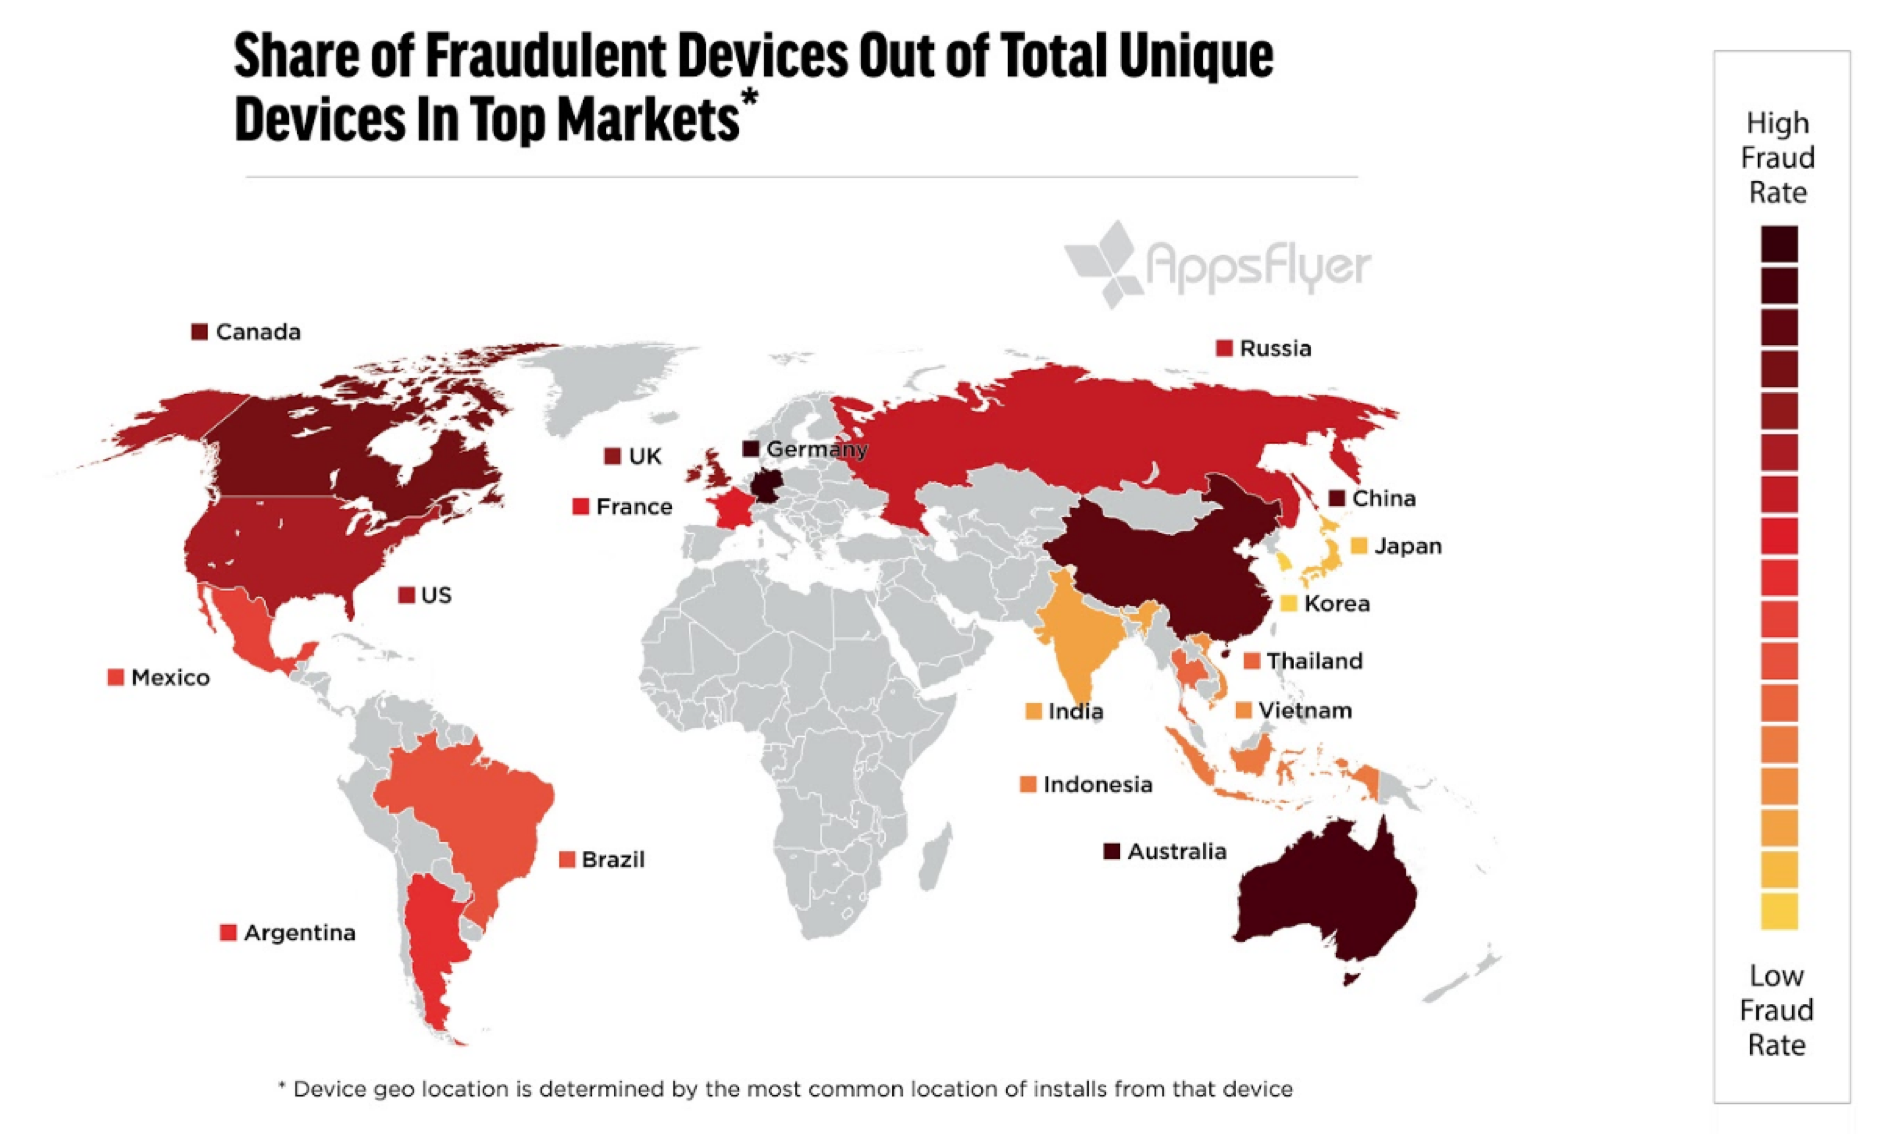 Image Source: https://www.appsflyer.com/resources/state-mobile-app-install-engagement-fraud/ 